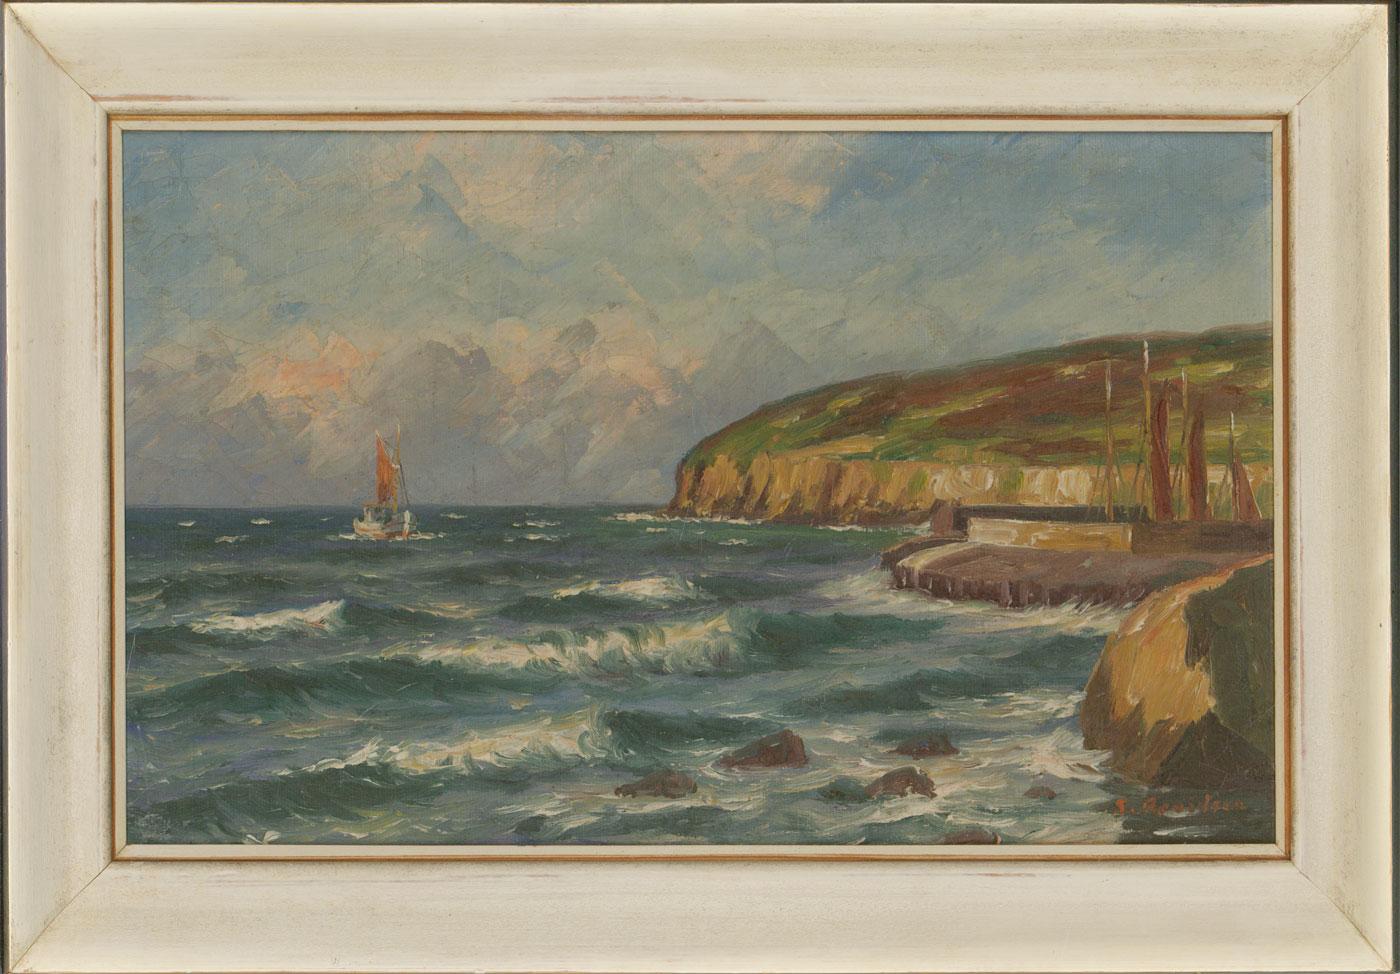 A fine coastal landscape by the Danish artist Svend Aage Arvidsen (1908-1981), depicting a coastline with high cliffs and headland, and a small fishing vessel. The artist has captured the movement and spirit of the setting, with dynamic brushwork